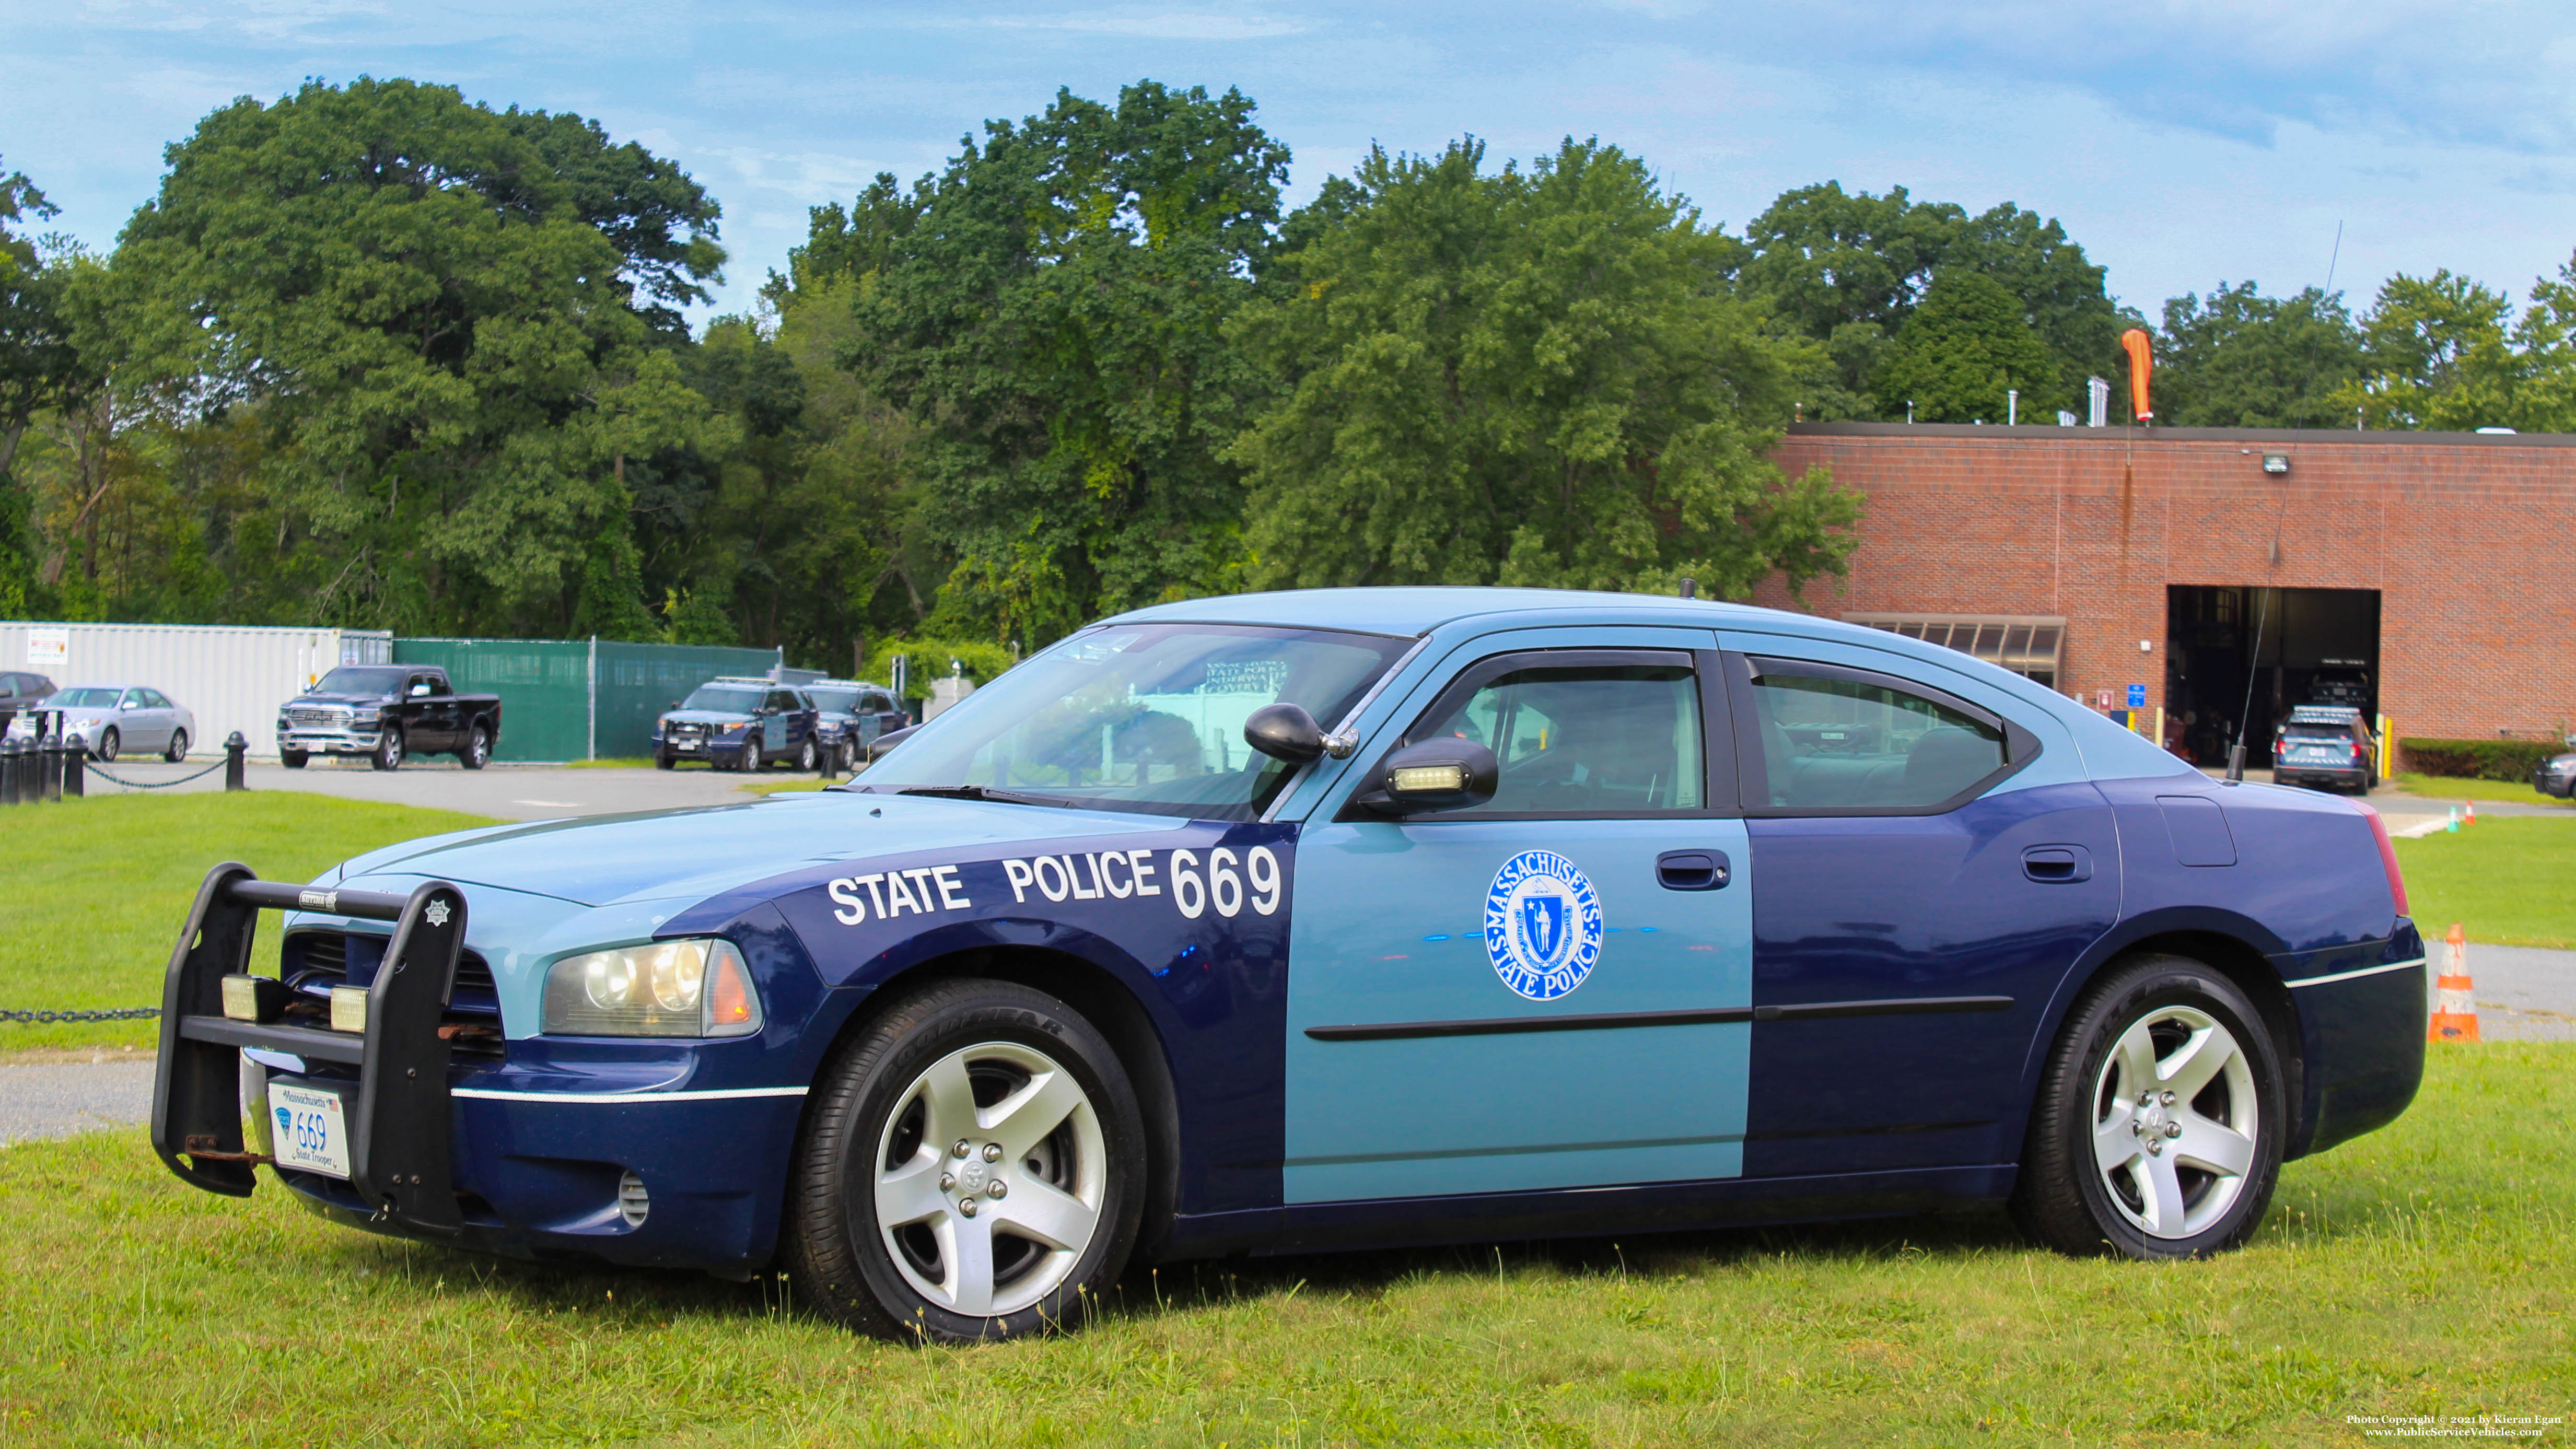 A photo  of Massachusetts State Police
            Cruiser 669, a 2007 Dodge Charger             taken by Kieran Egan